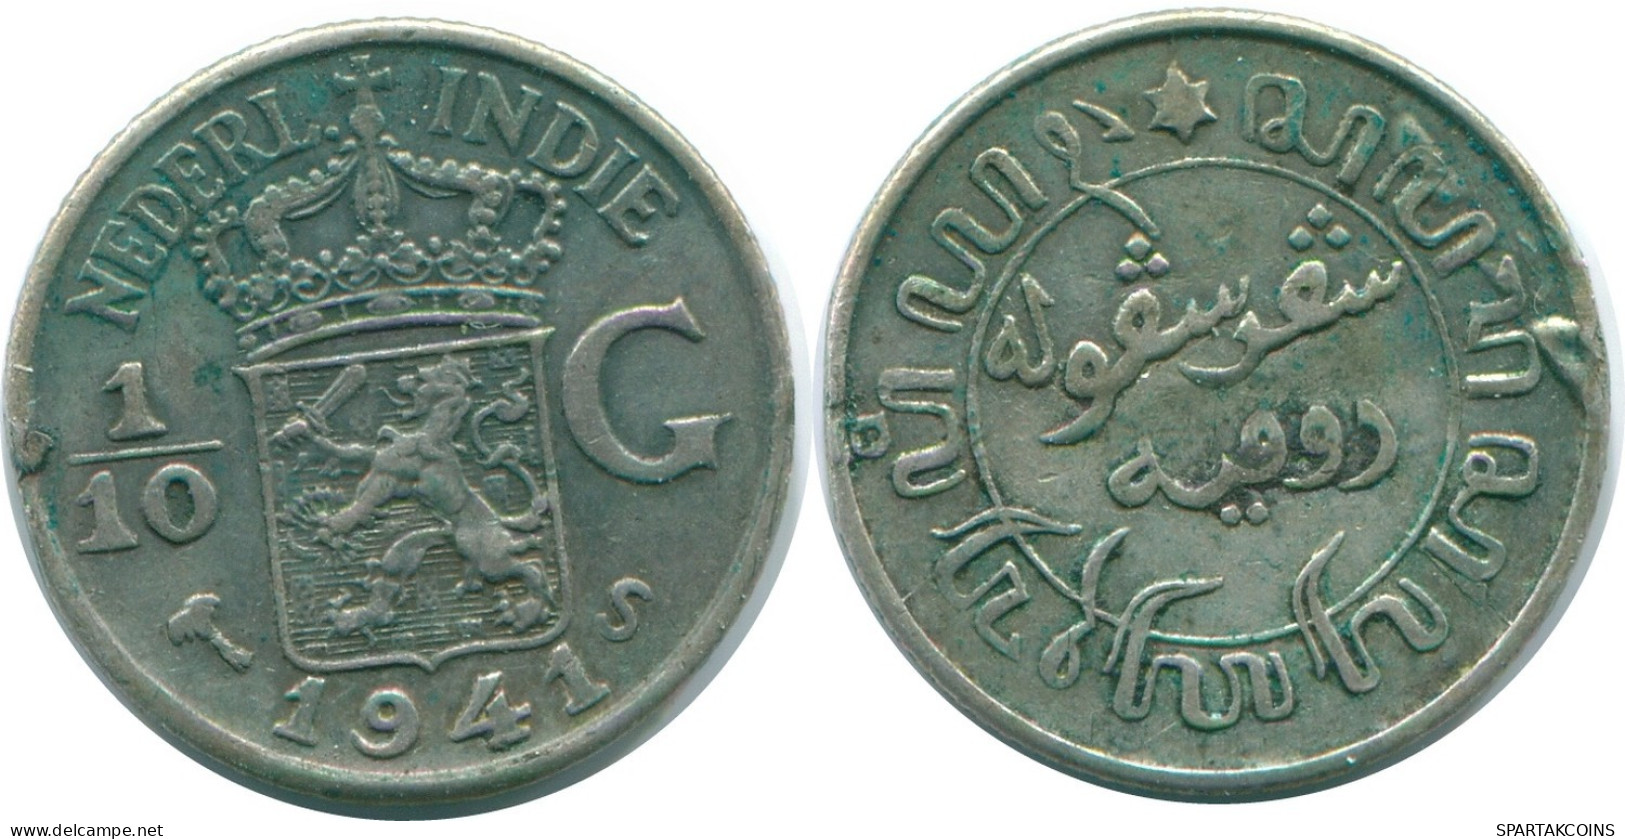 1/10 GULDEN 1941 S NETHERLANDS EAST INDIES SILVER Colonial Coin #NL13699.3.U.A - Dutch East Indies